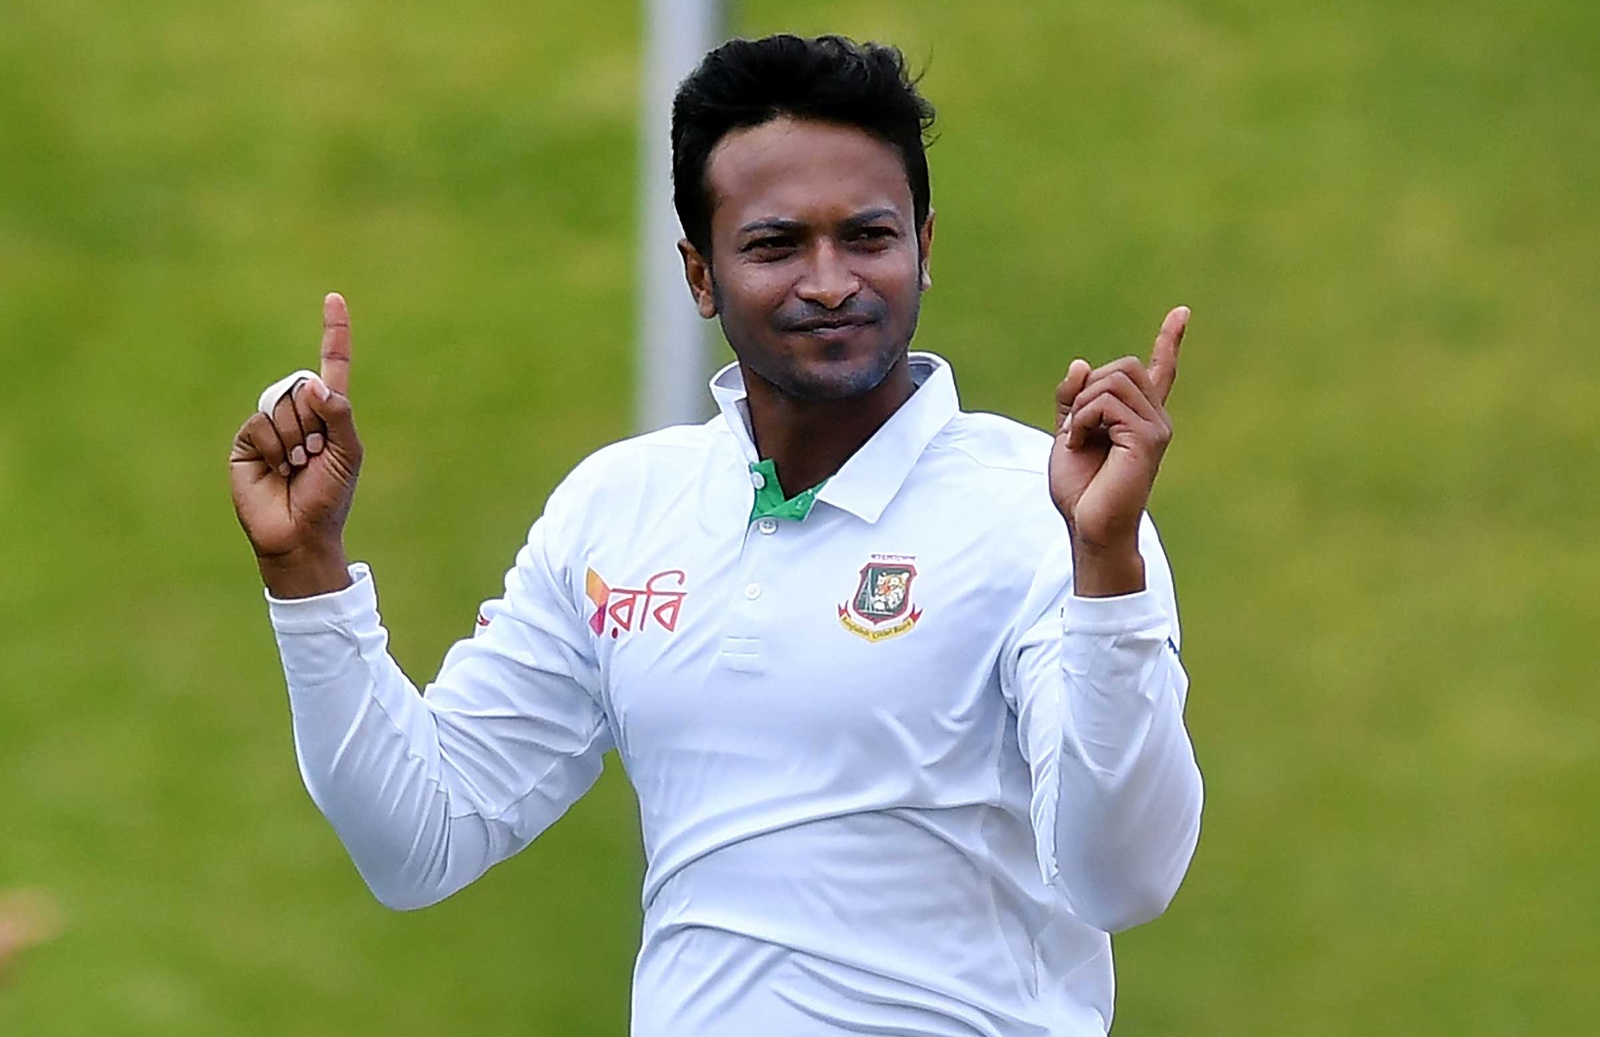 Bangladesh Tour of New Zealand: Shakib Al Hasan pulls out of New Zealand tour as BCB approves his leave